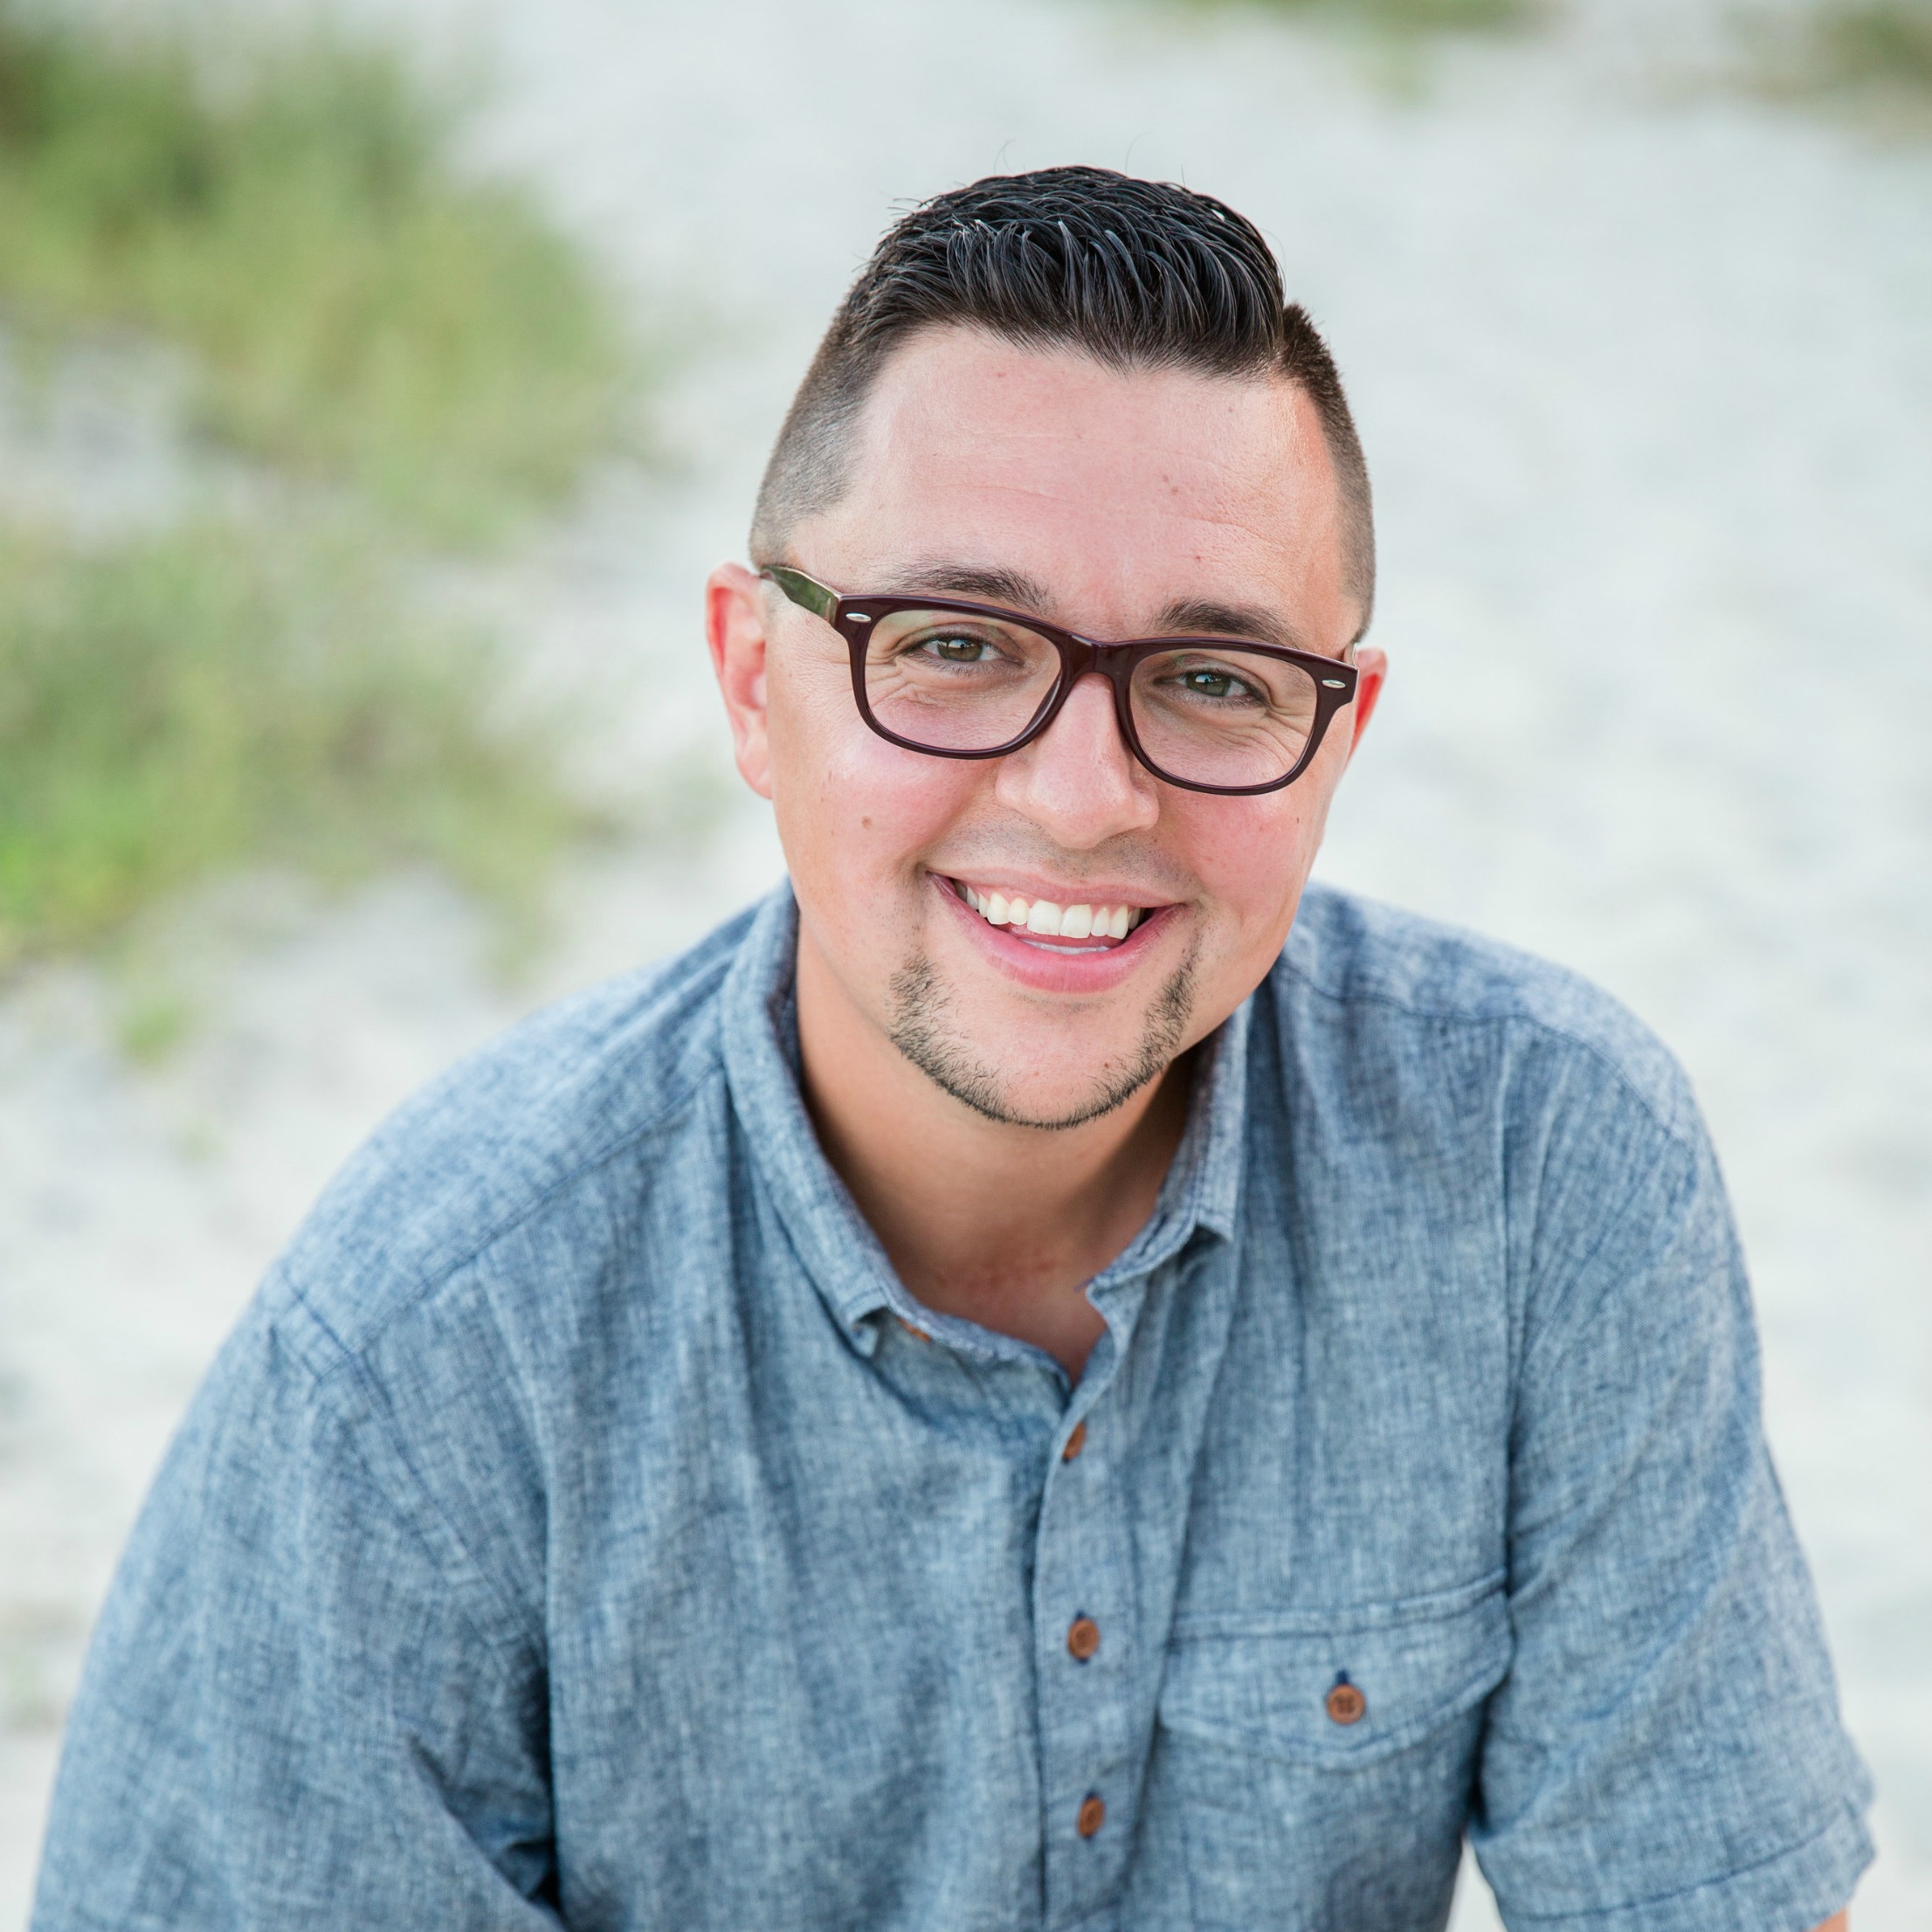  Jeff serves as the Associate Pastor of Youth &amp; Family at Memorial Baptist Church in Columbus, Ohio.&nbsp; He is a graduate of Cedarville University and Grace Theological Seminary.&nbsp; Jeff has been serving in youth ministry for nearly a decade